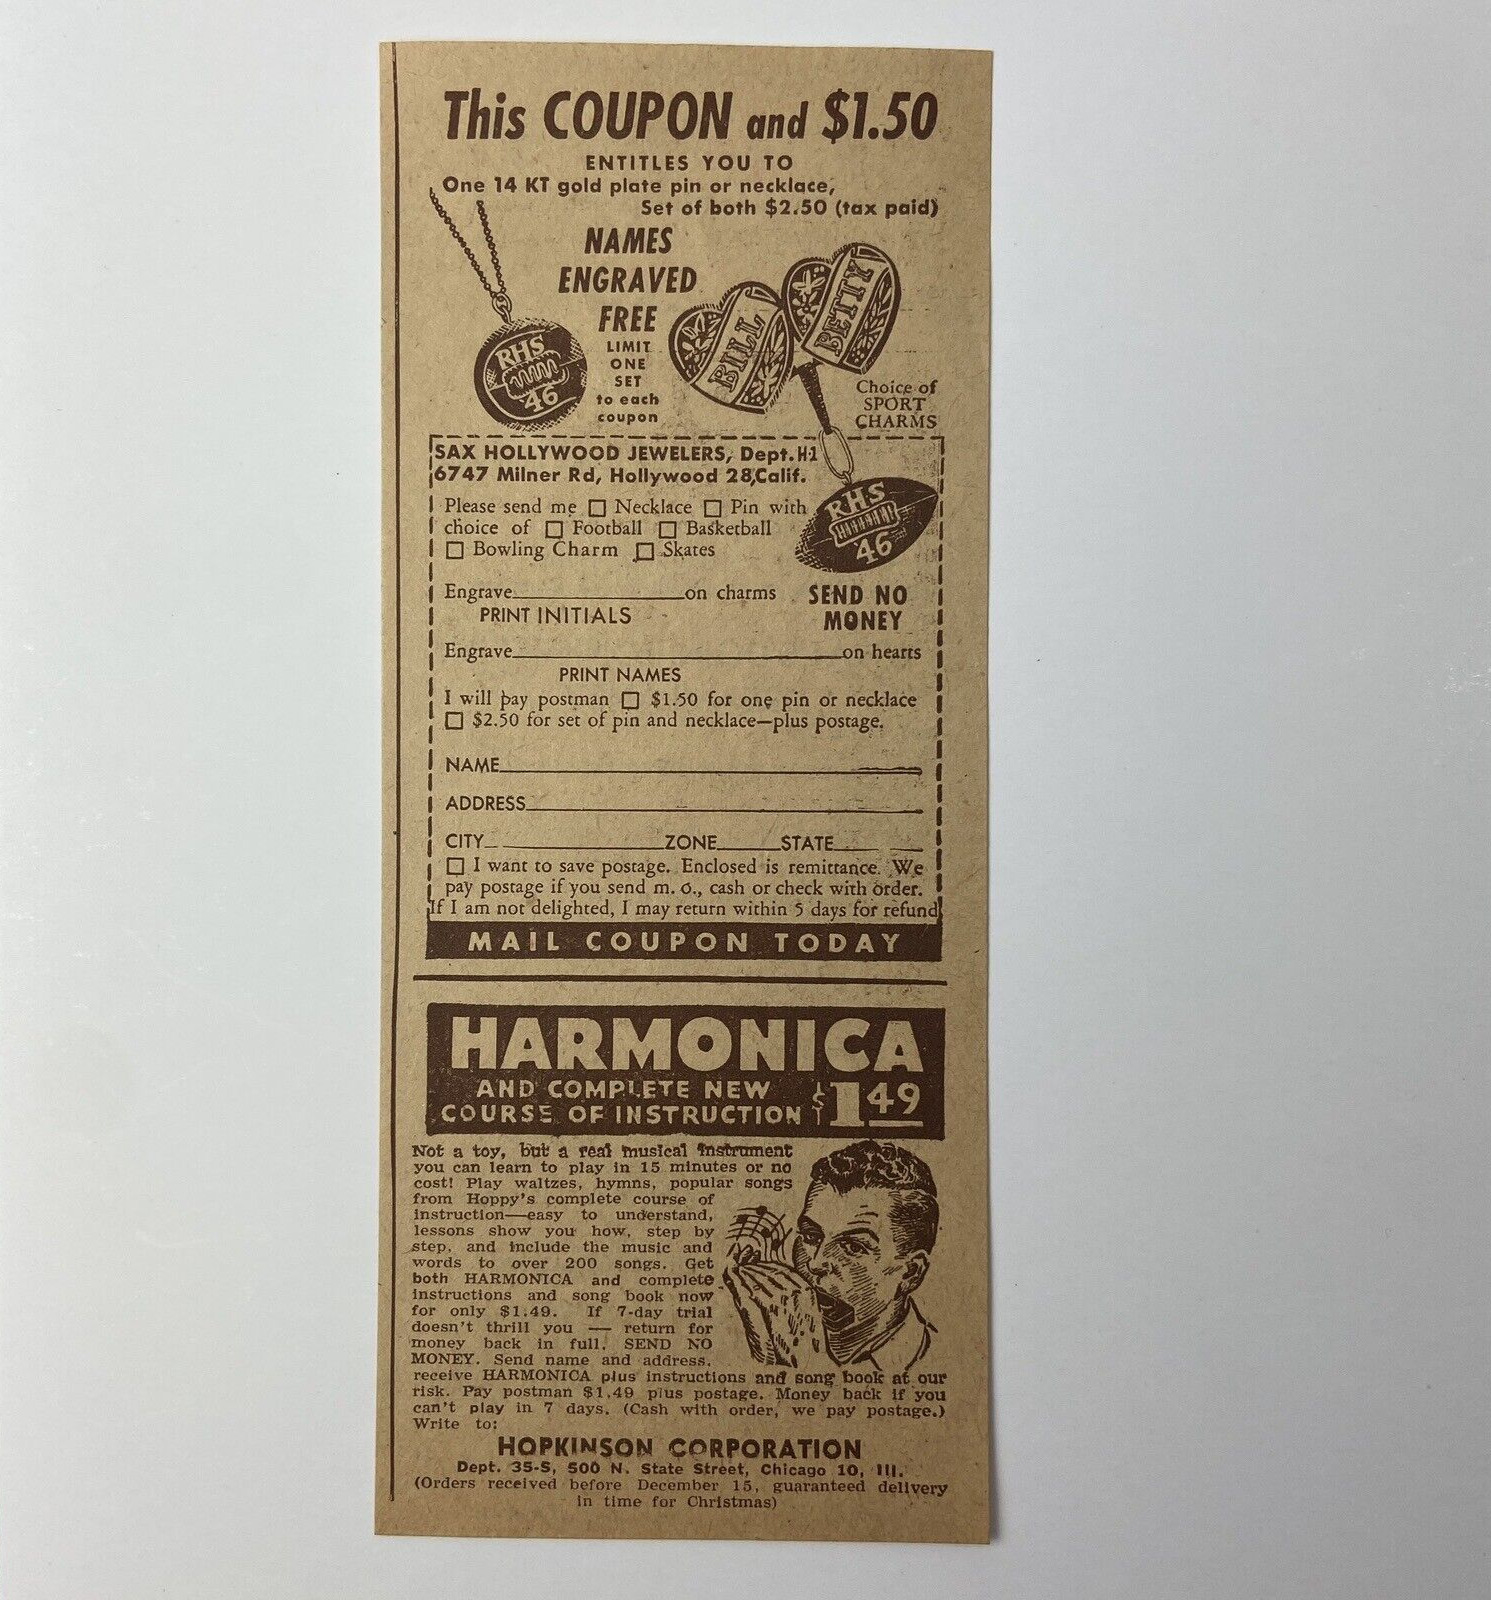 Vintage Print Ad Harmonica Engraved Necklace Sax Hollywood Jeweler Coupon 1940s